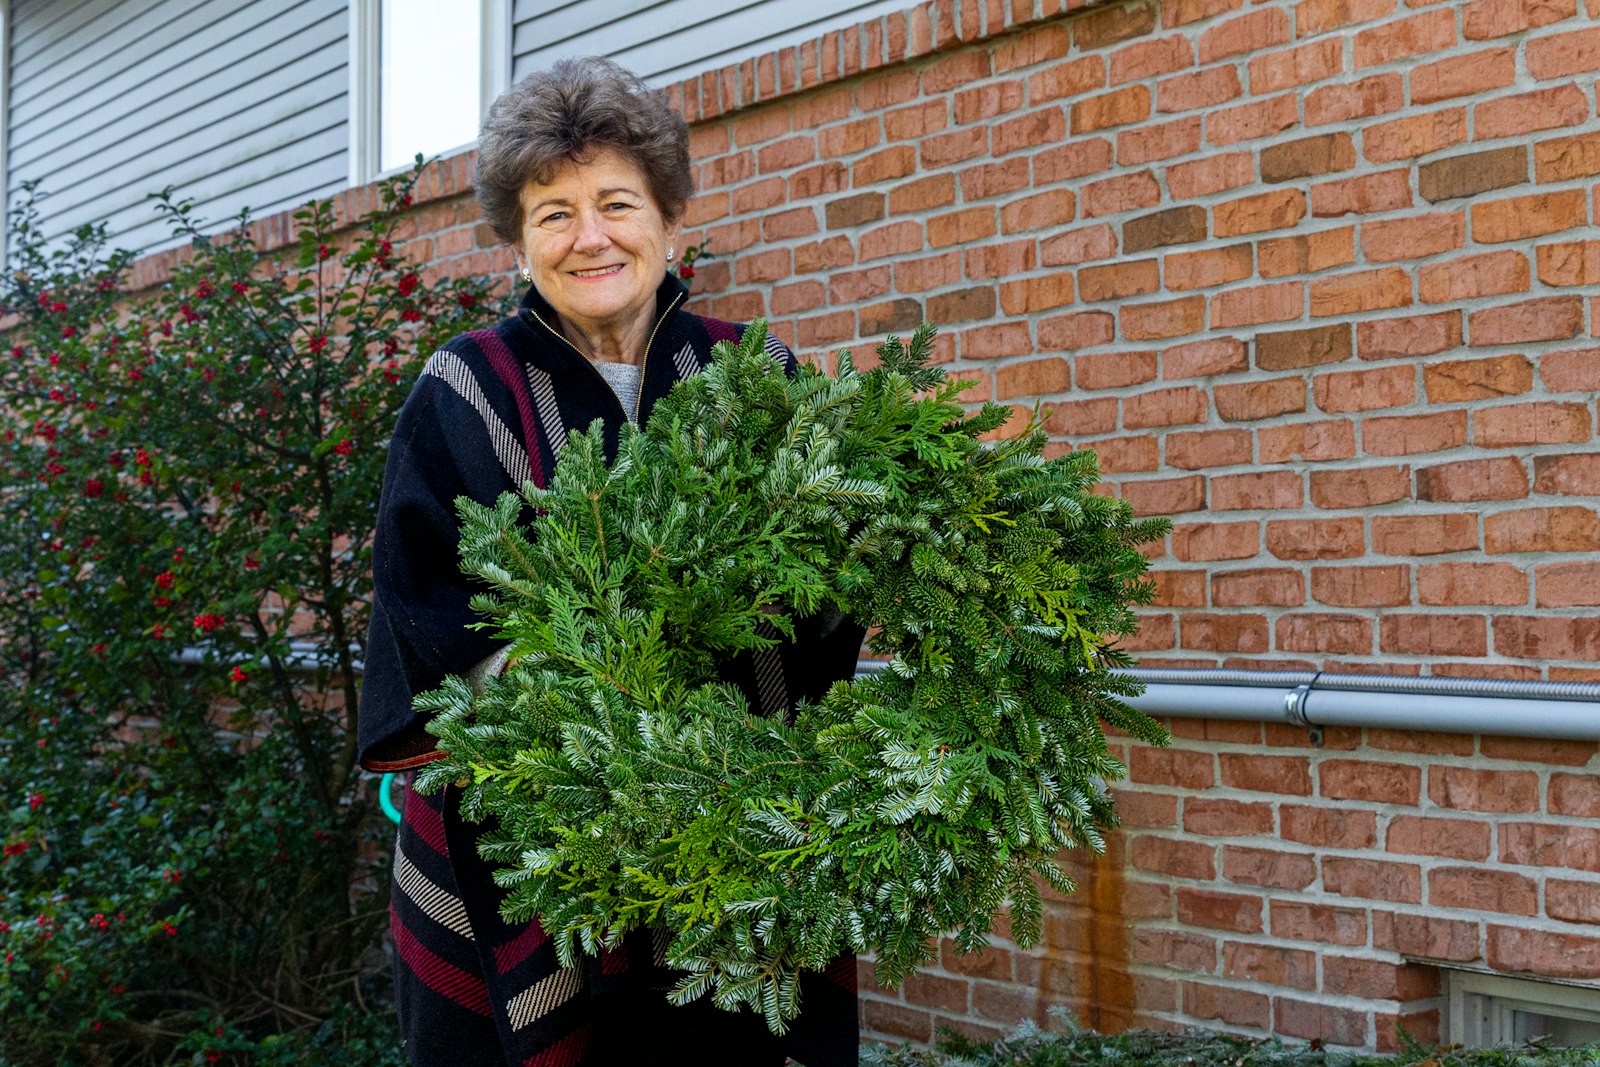 Catherine Genovese holds a wreath made for sale at Candy Cane Christmas Tree Farm. The farm opens for the season the weekend before Thanksgiving each year.